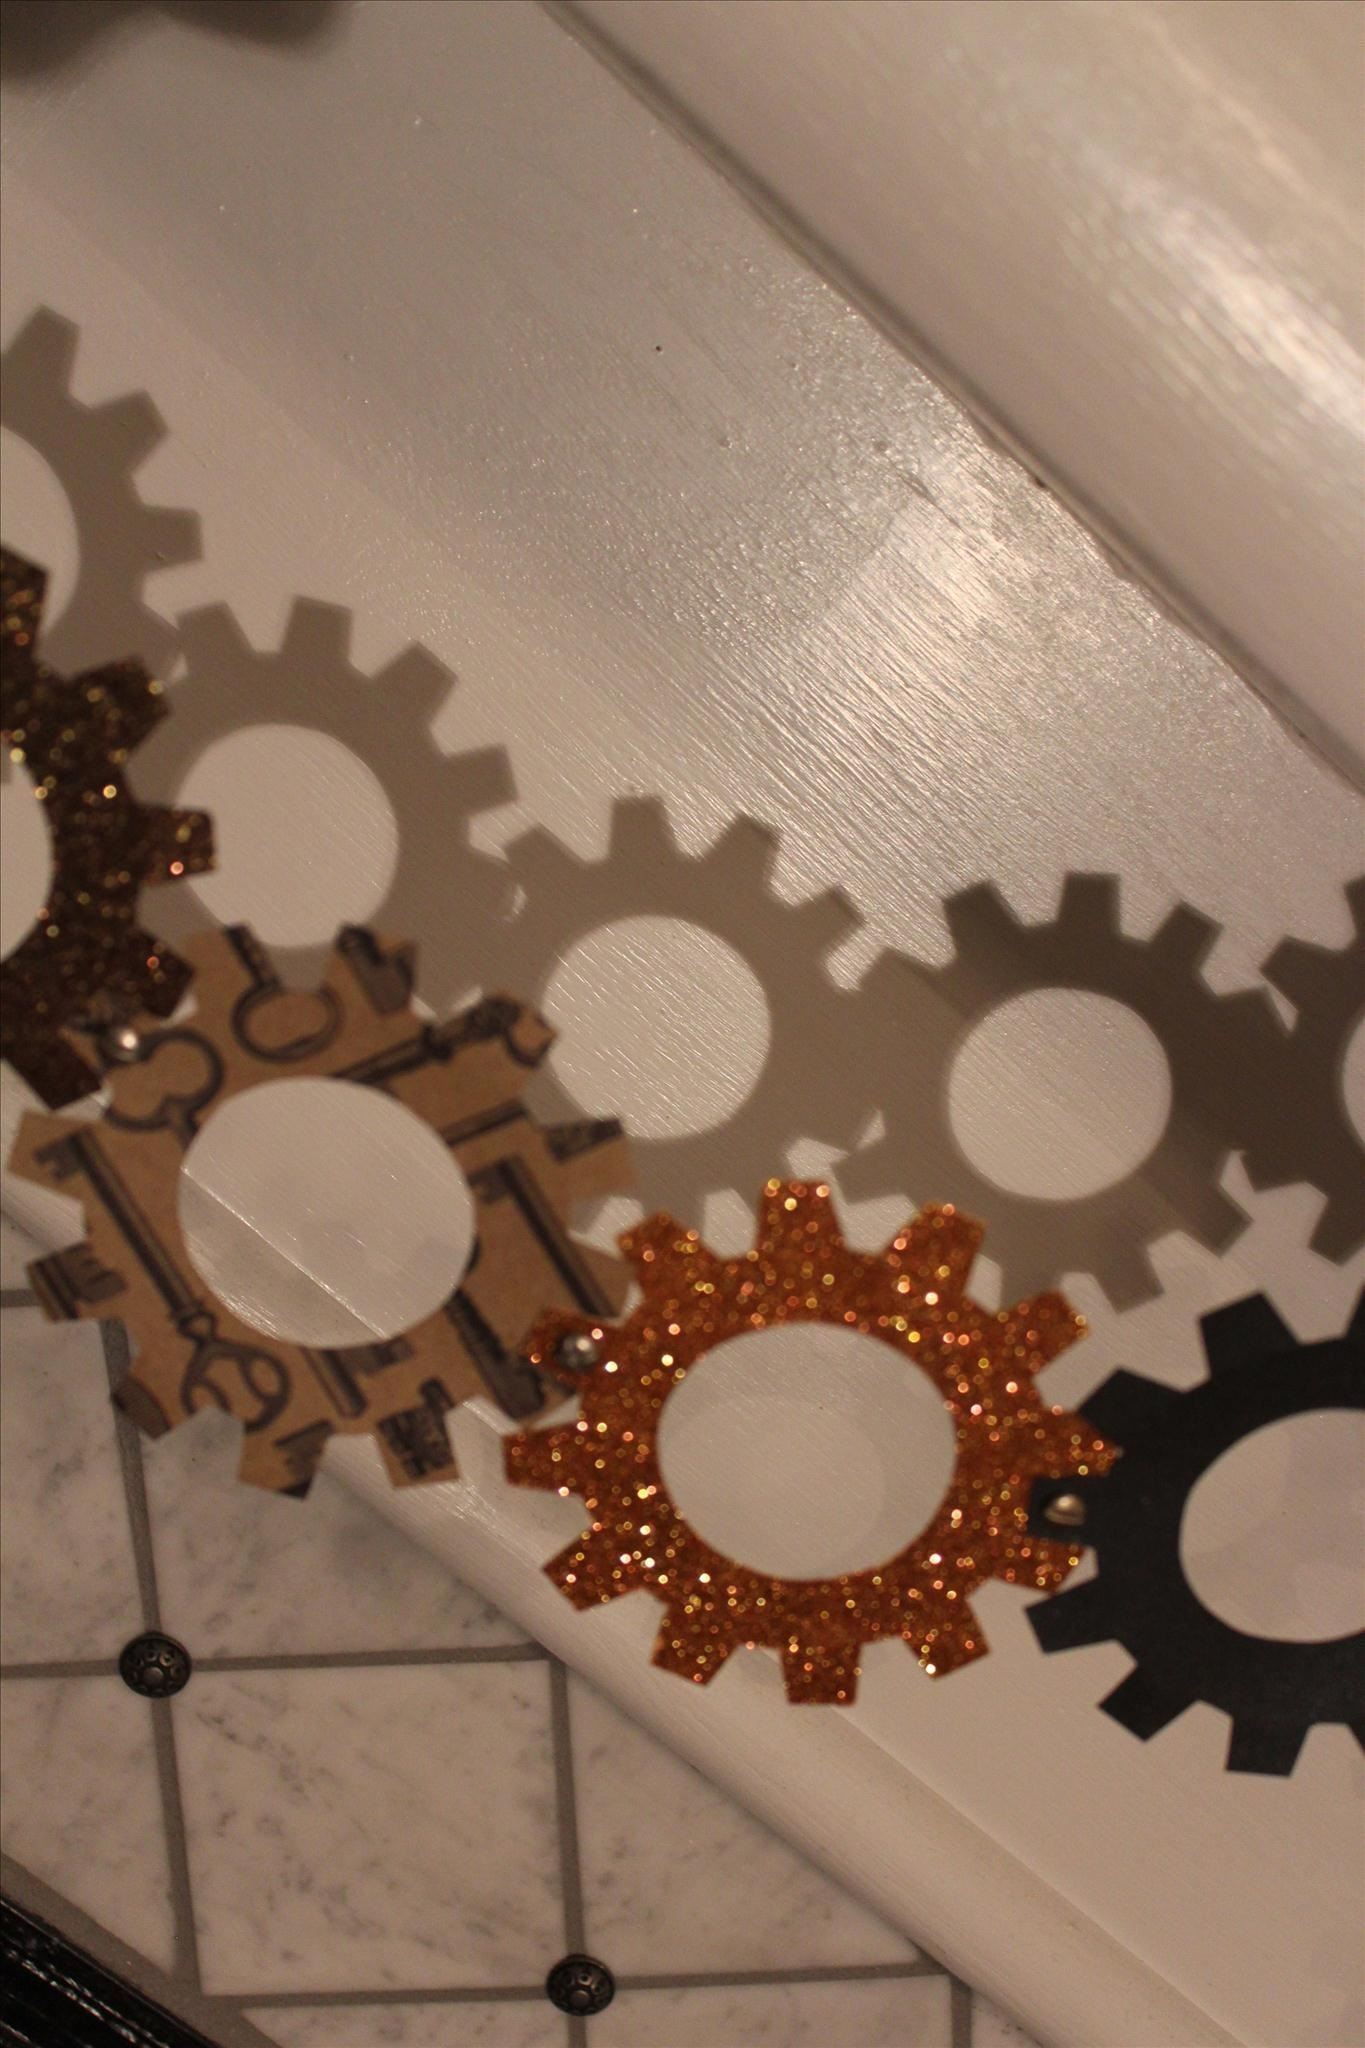 Steampunk Your Halloween Decorations with These DIY Interlocking Paper Gears